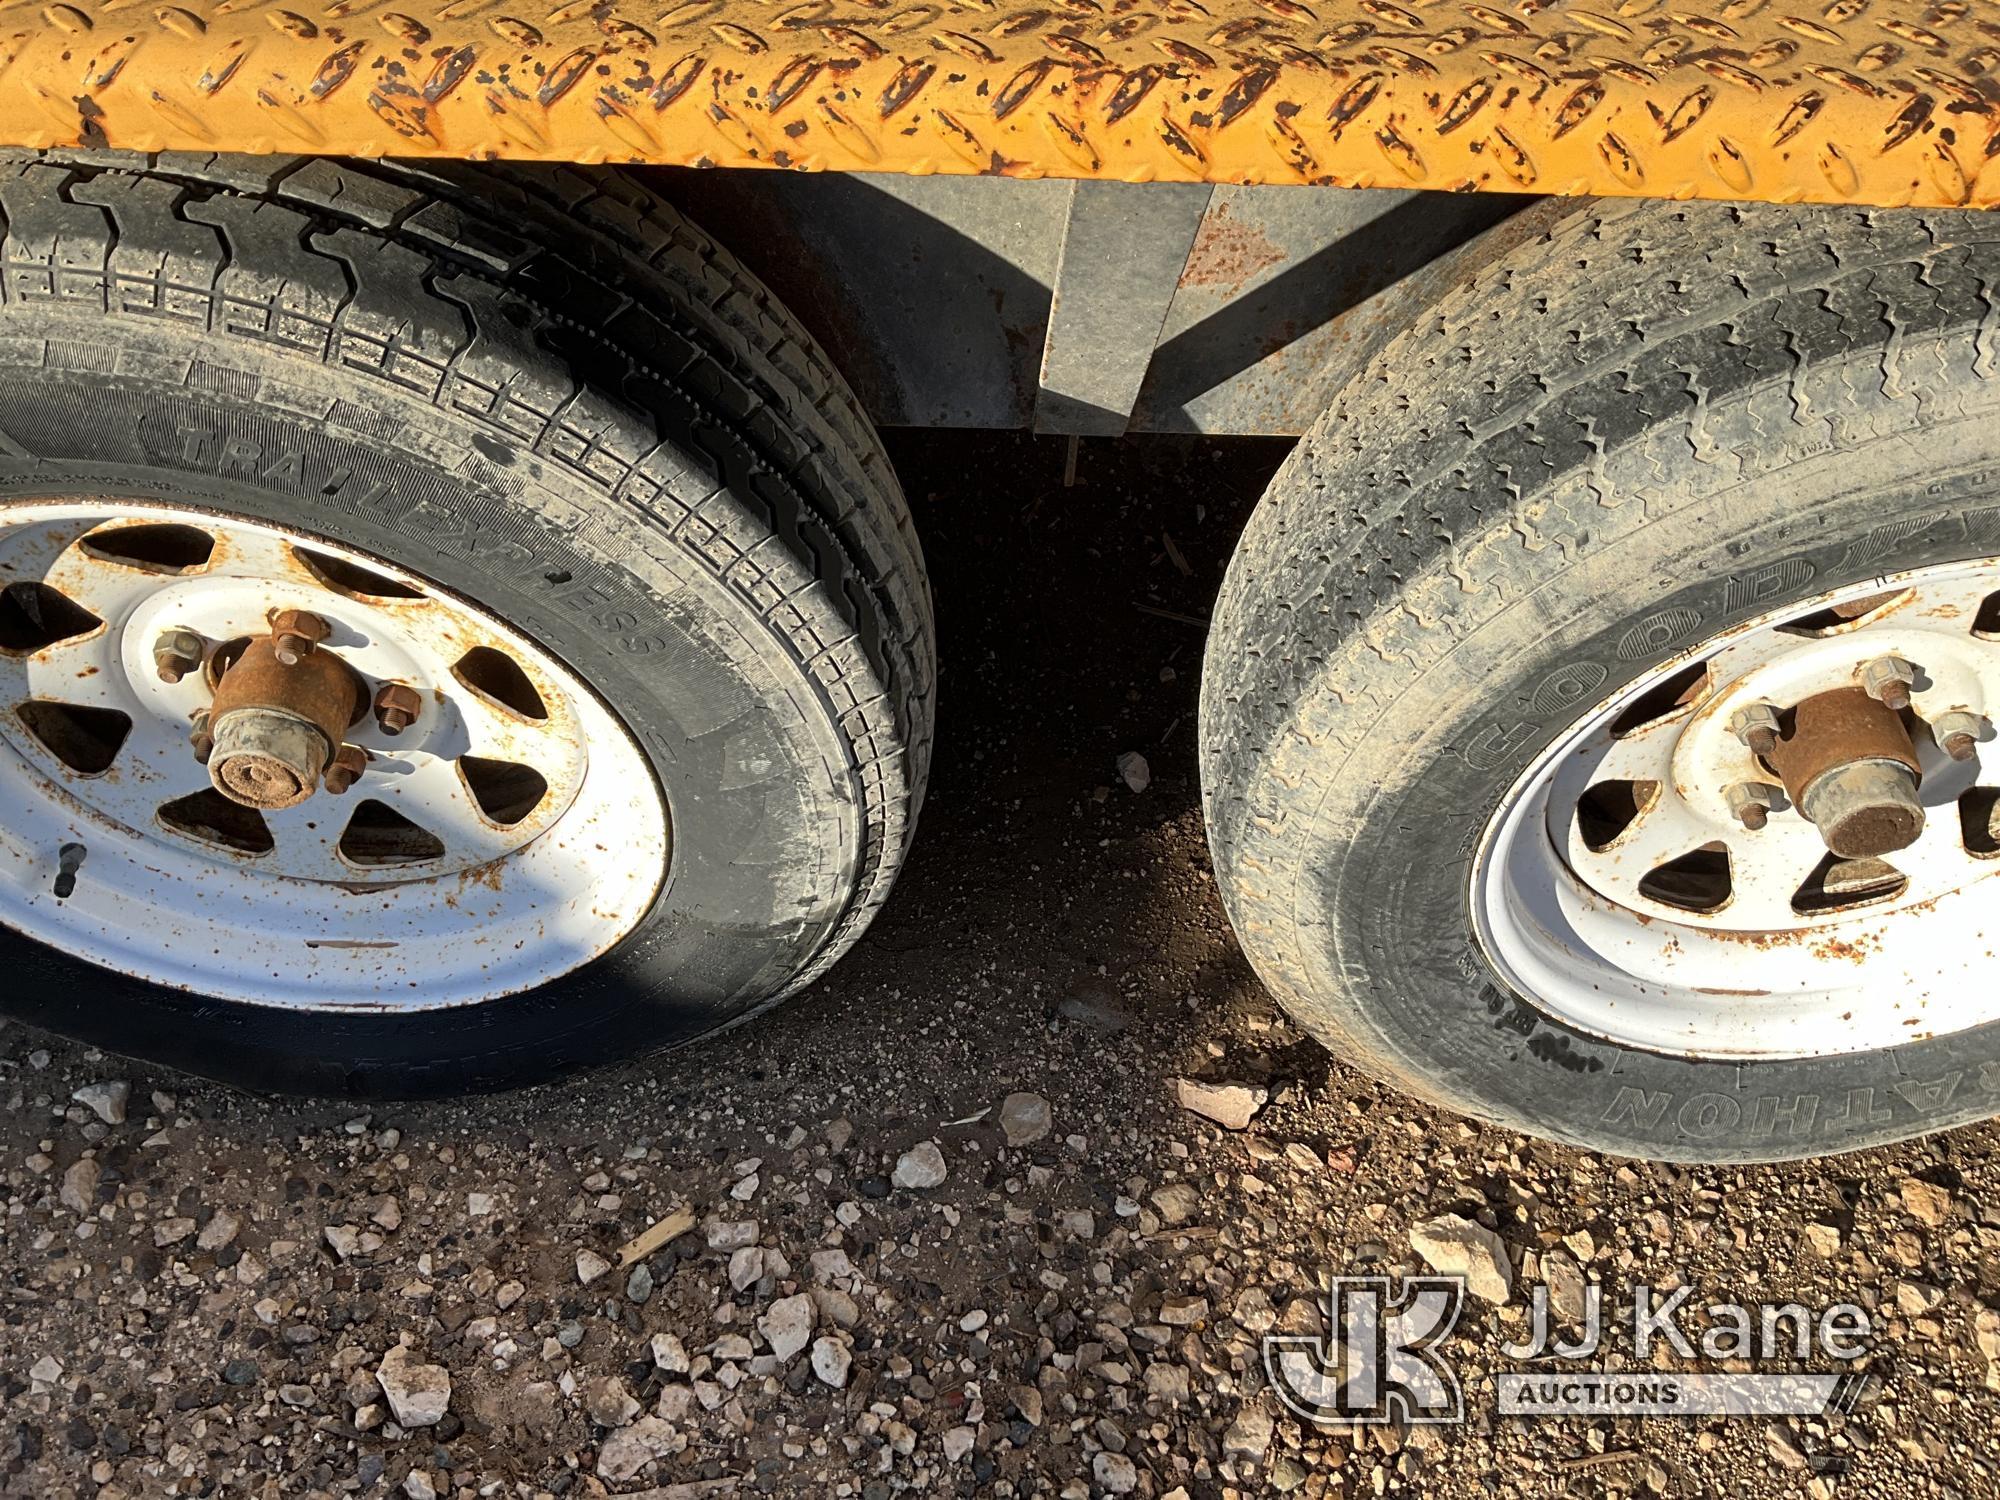 (Wolfforth, TX) 2005 Vactron PMD-00 T/A Vacuum Excavation Trailer Not Running) (Parts Only, Missing